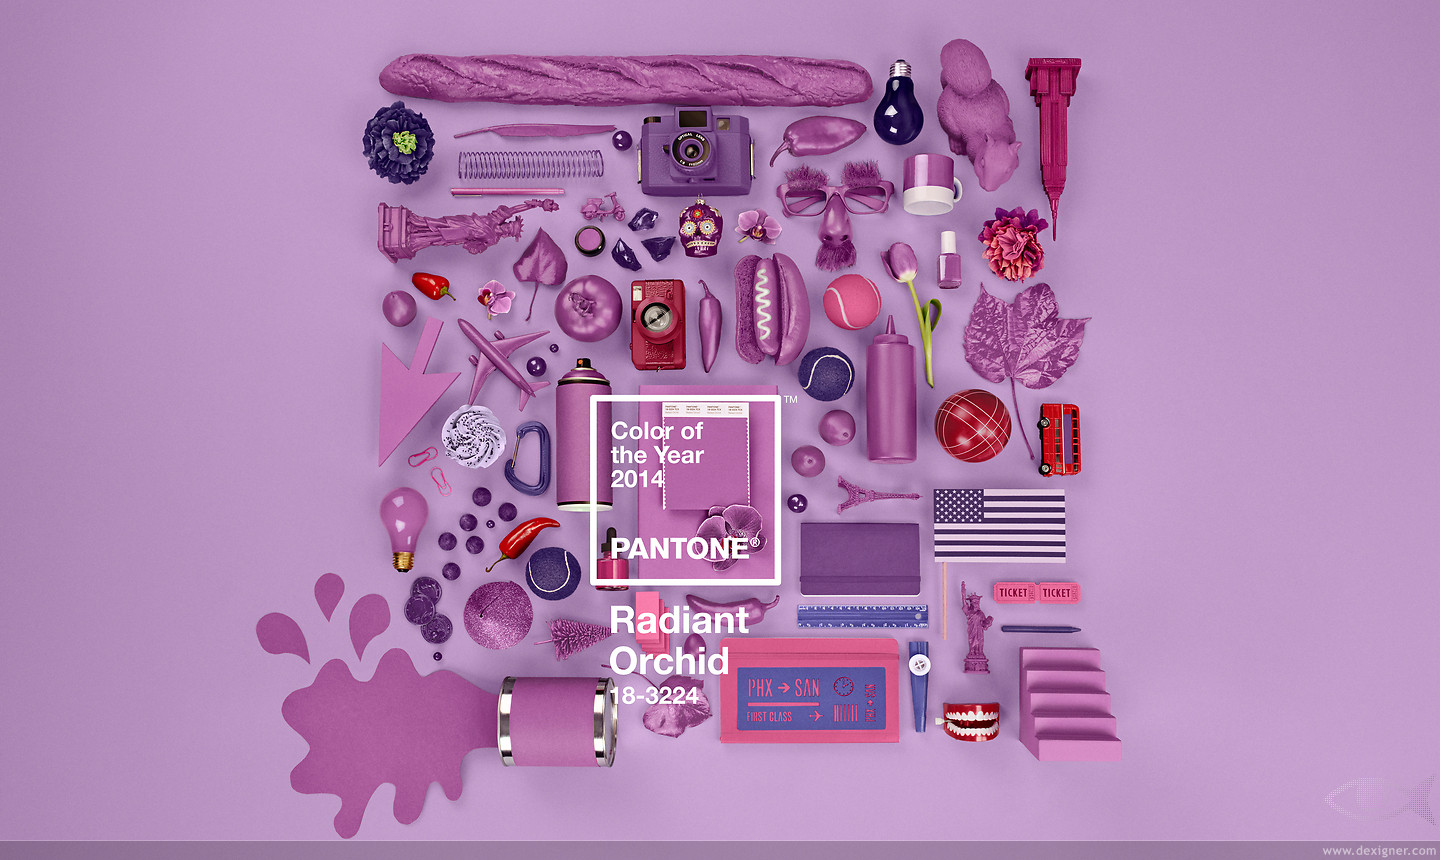 Radiant_Orchid_PANTONE_2014_Color_of_the_Year_01_gallery